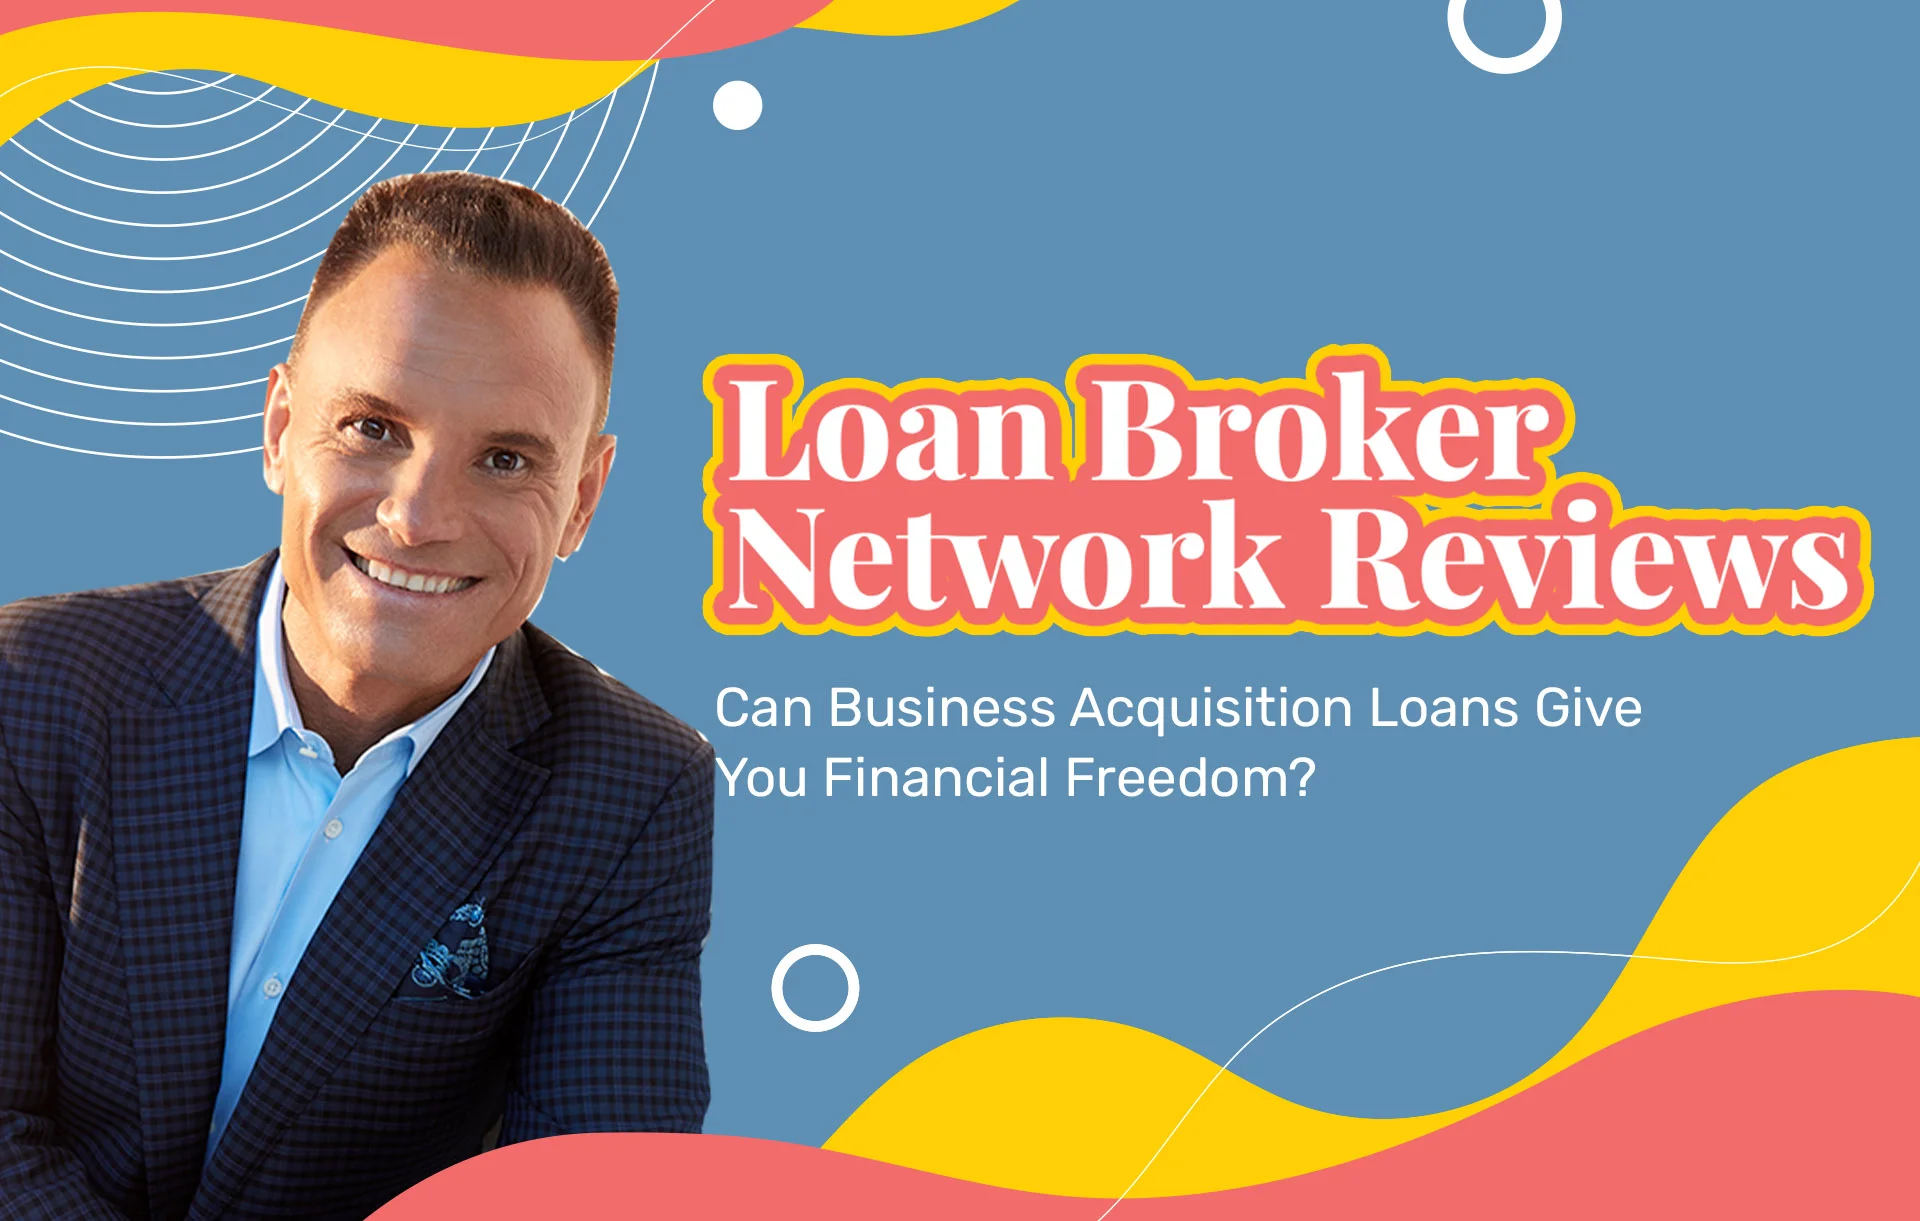 Loan Broker Network Reviews (2023 Update): Can Business Acquisition Loans Give You Financial Freedom?